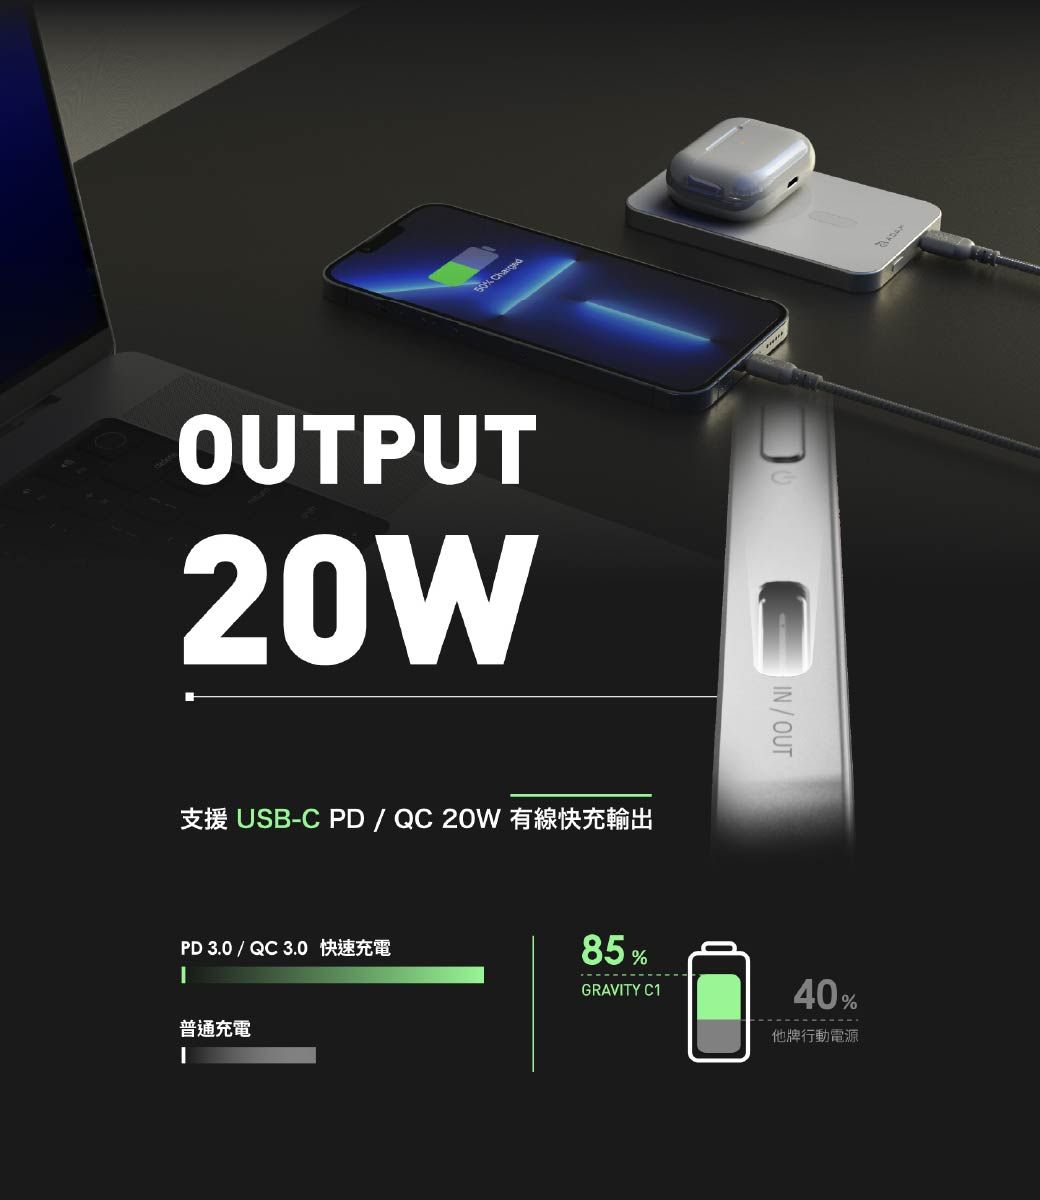 OUTPUTUSB-C PD  QC 20W PD 3.0QC 3.0普通充電IN/OUT85%GRAVITY C140%他牌行動電源